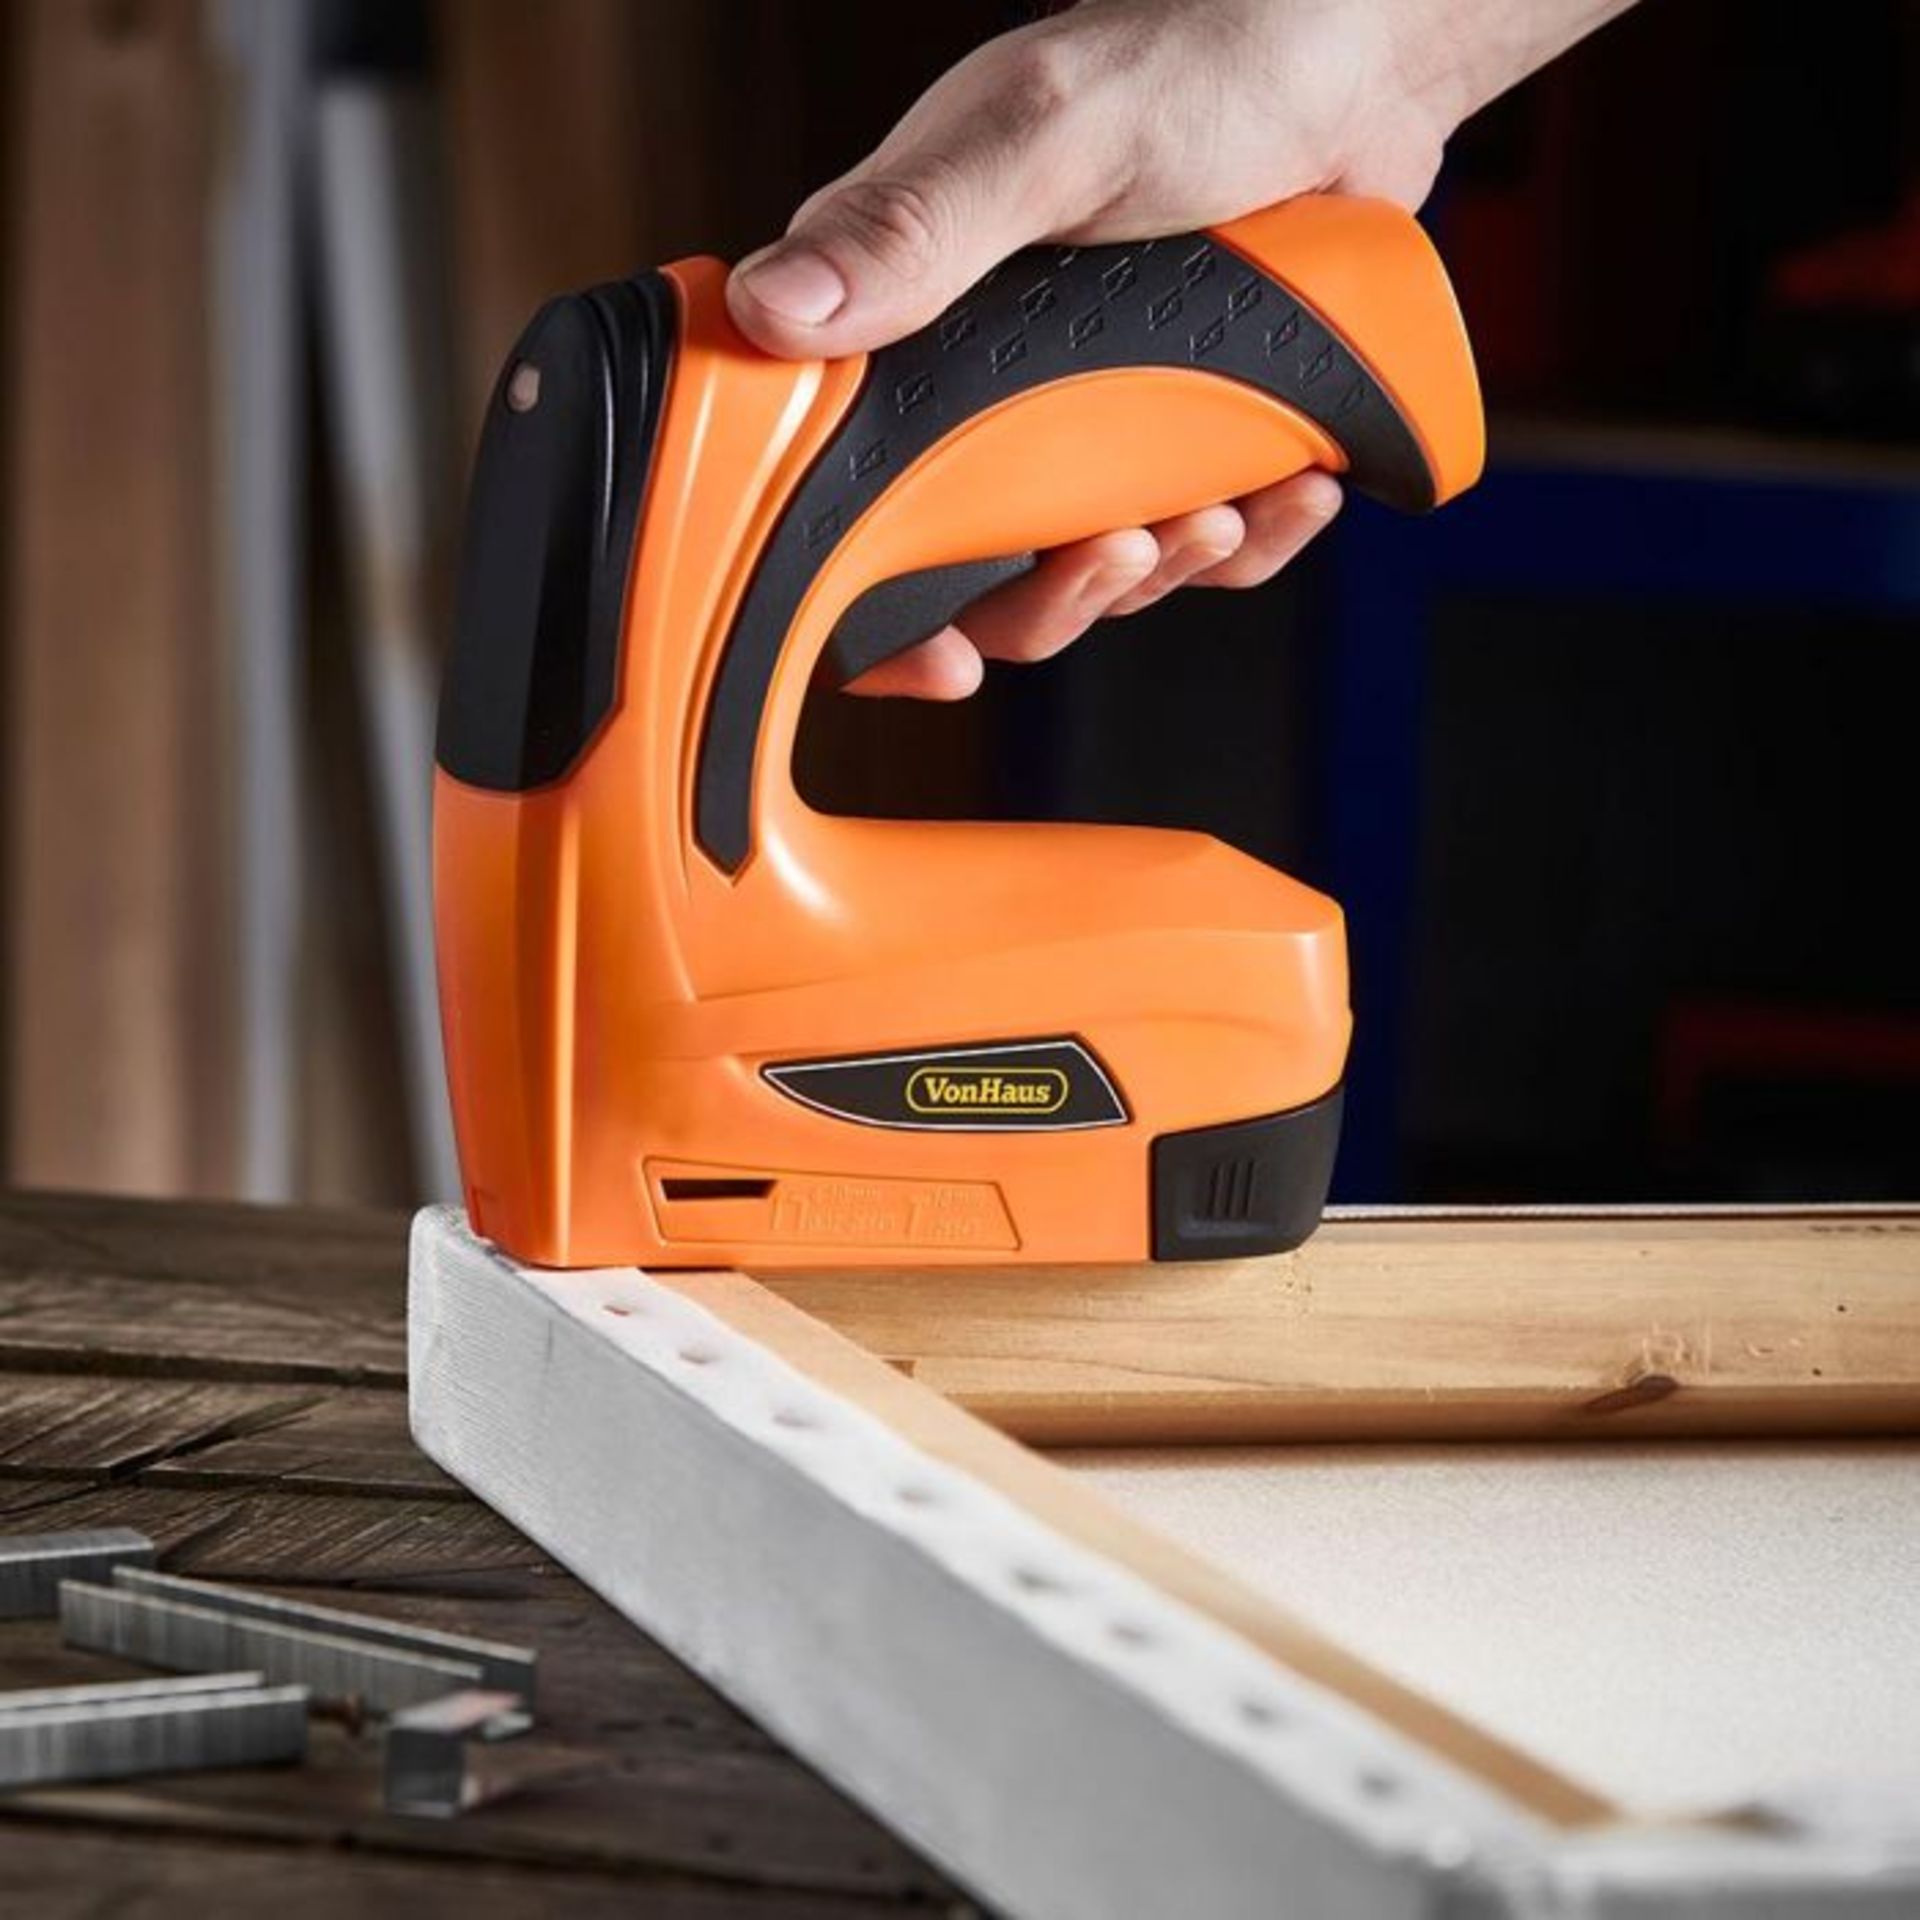 (V309) 3.6V Nailer & Stapler Ideal for crafting and decorating – quickly staple, nail or fas...